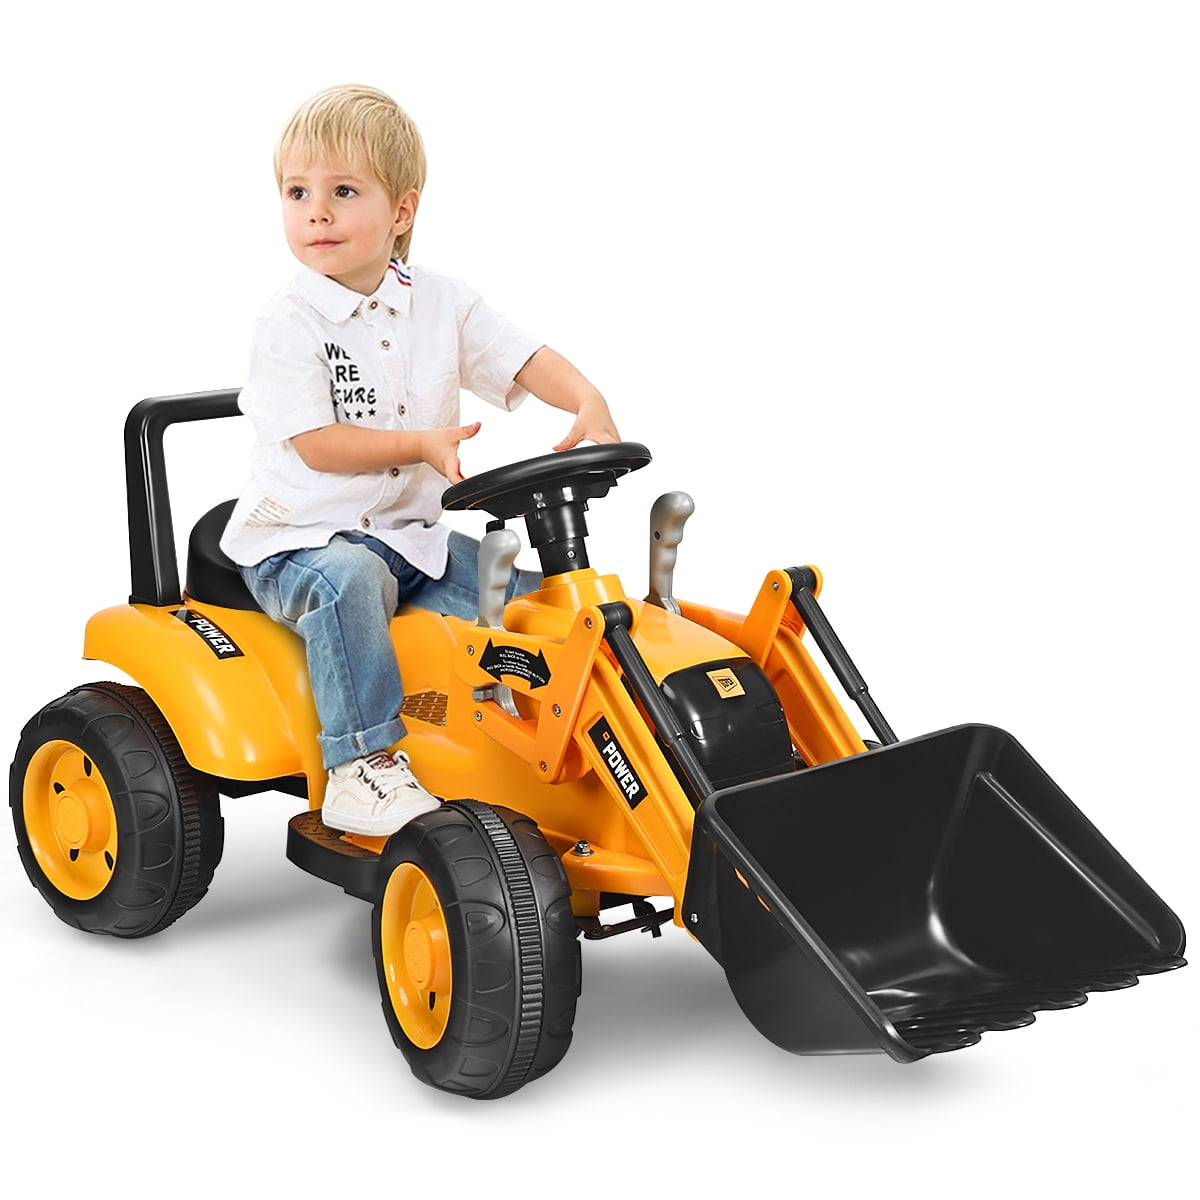 Kids Electric Ride On Toy Excavator Car Outdoor 6v Battery Powered Wheels Yellow 